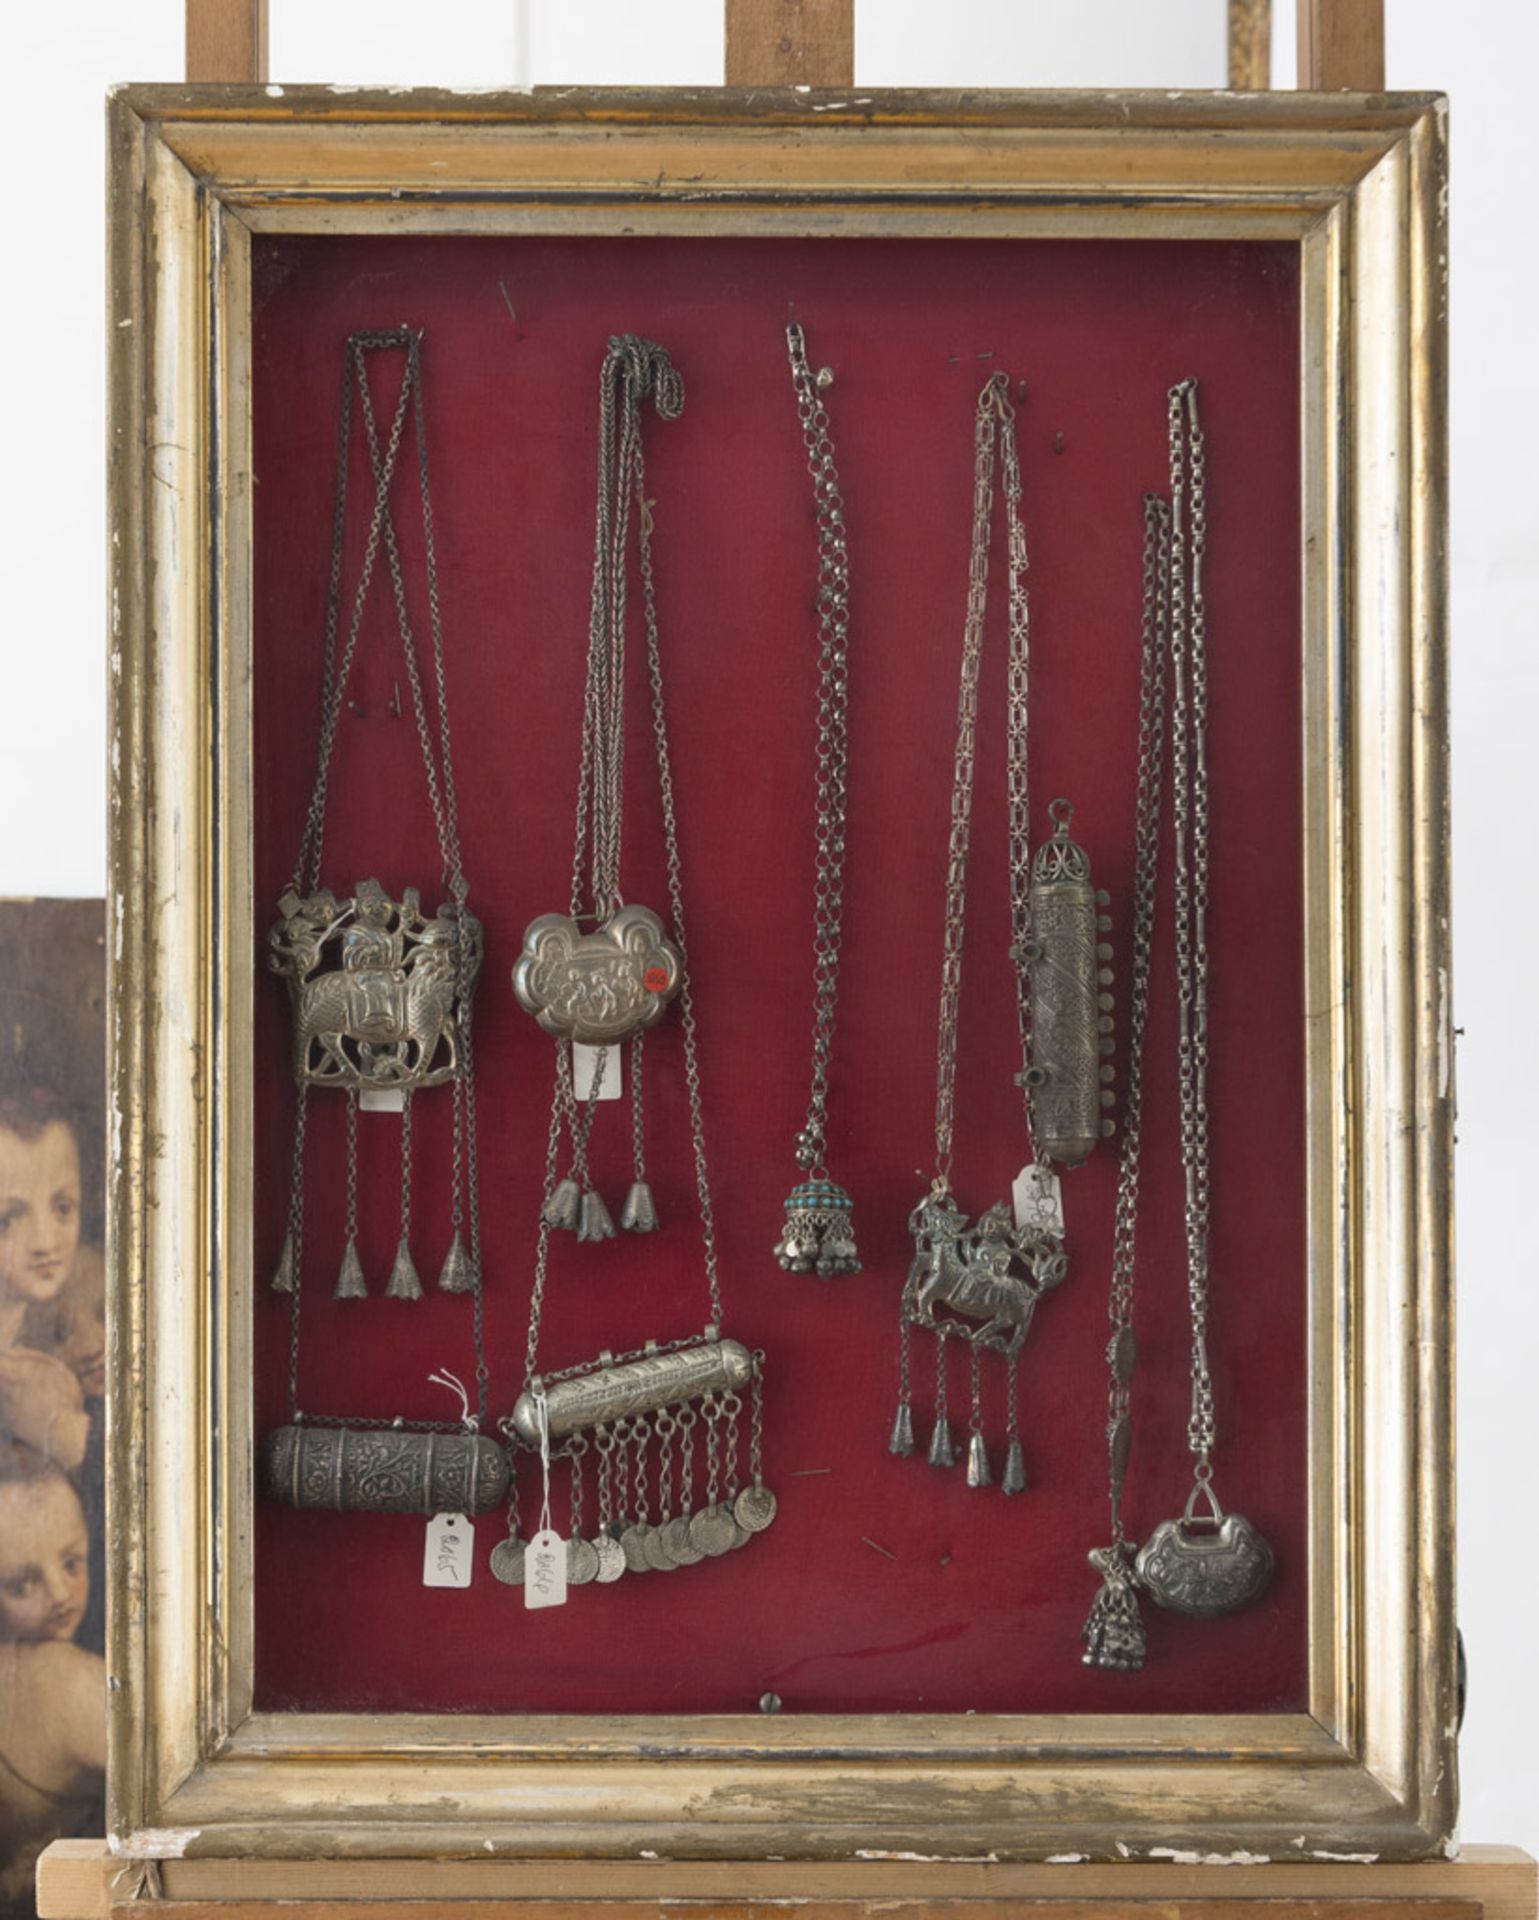 EIGHT PIECES OF JEWELRY IN SILVER AND METAL, CHINA, INDIA AND MIDDLE EAST EARLY 20TH CENTURY In